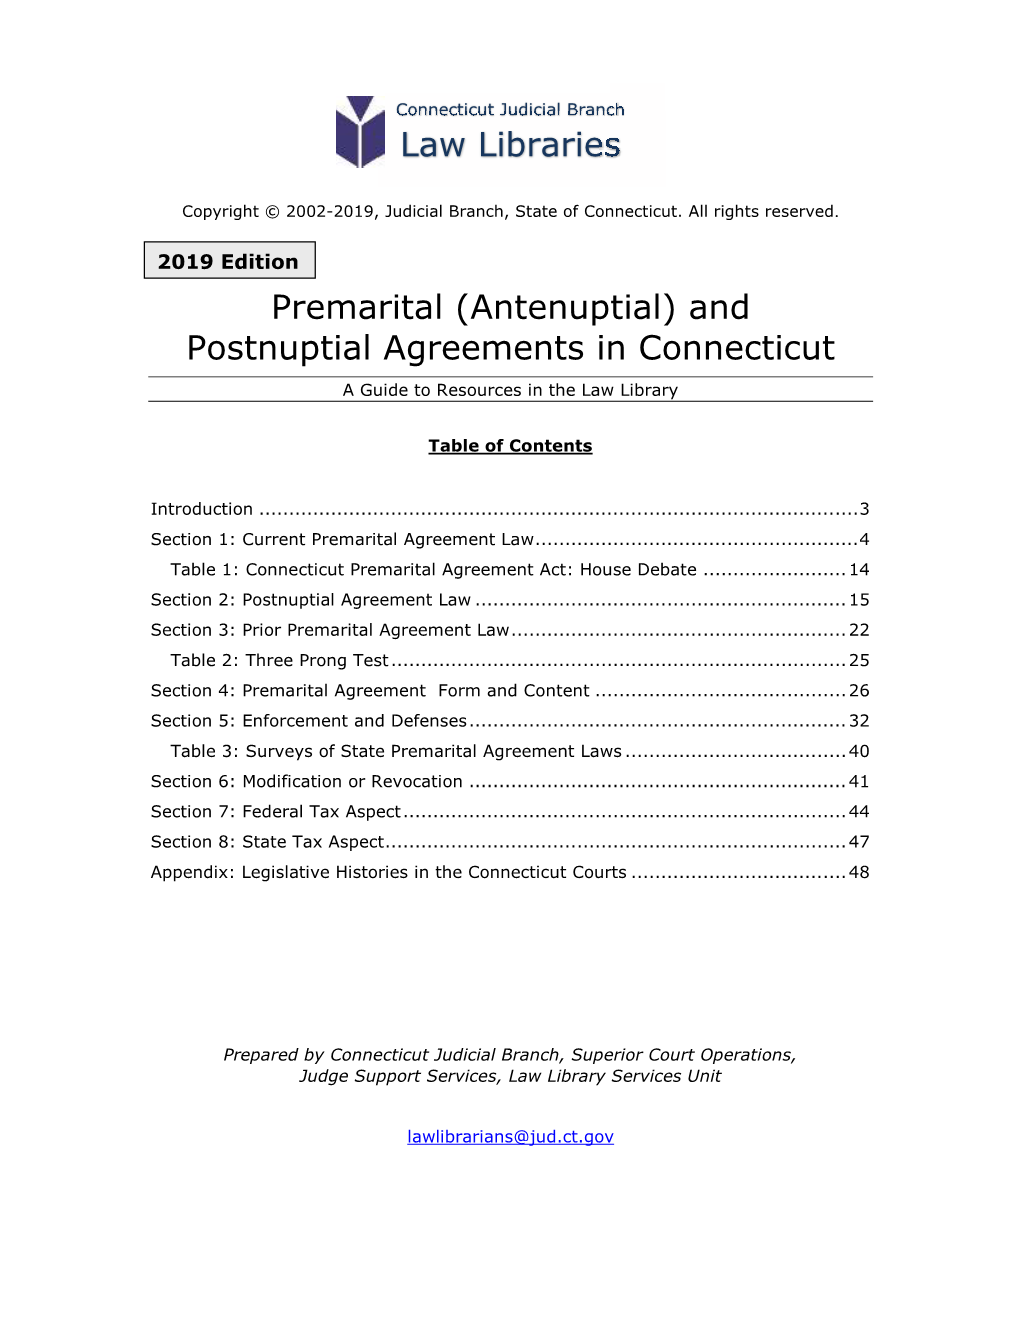 Premarital (Antenuptial) and Postnuptial Agreements in Connecticut a Guide to Resources in the Law Library